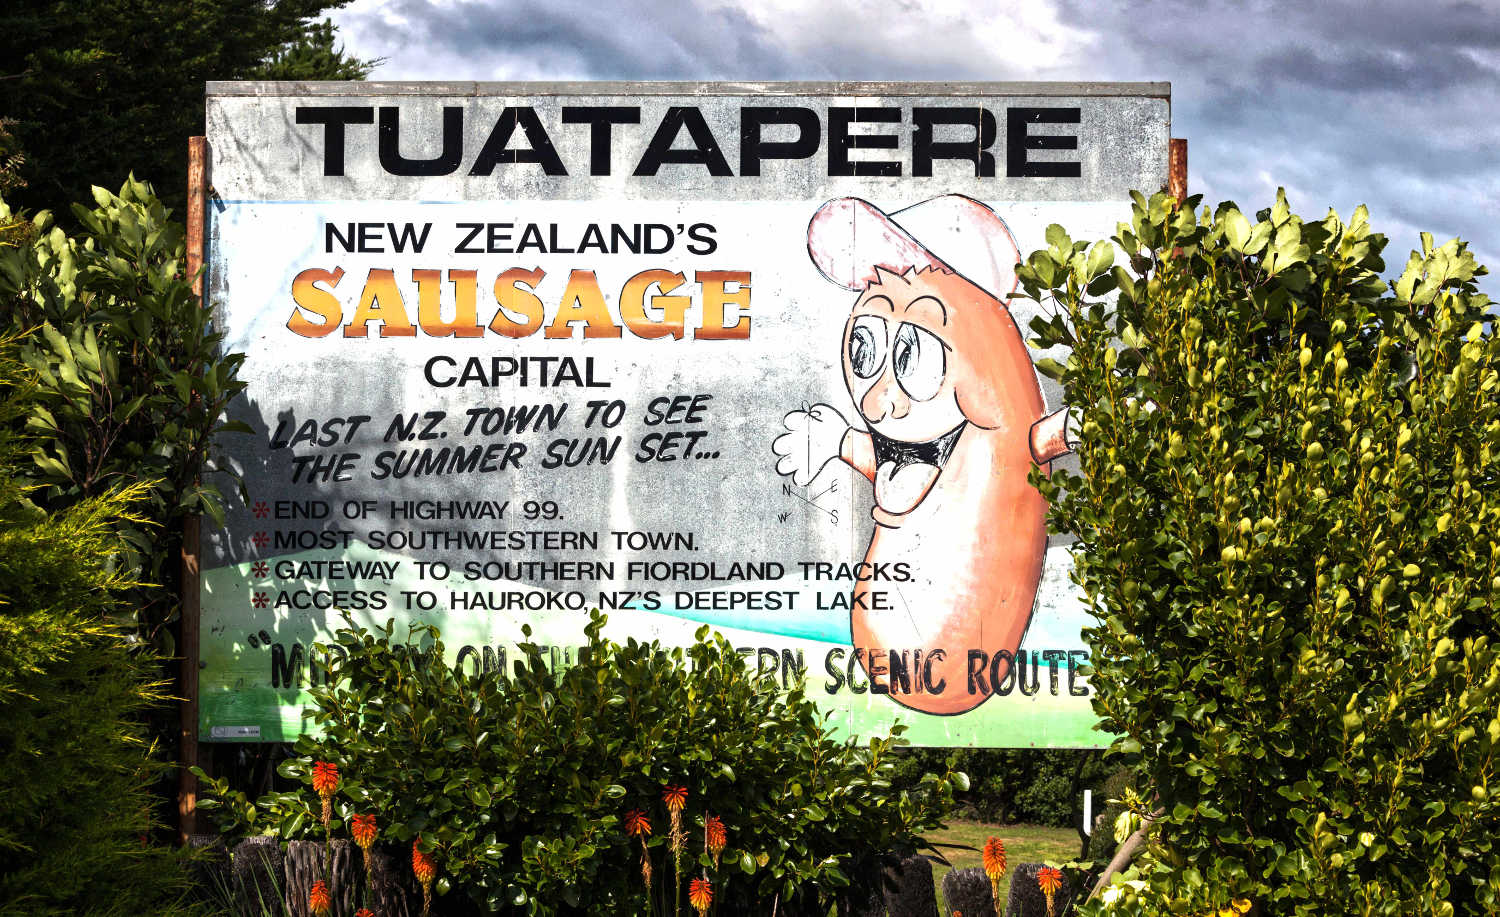 Tuatapere world famous in NZ sausages, New Zealand